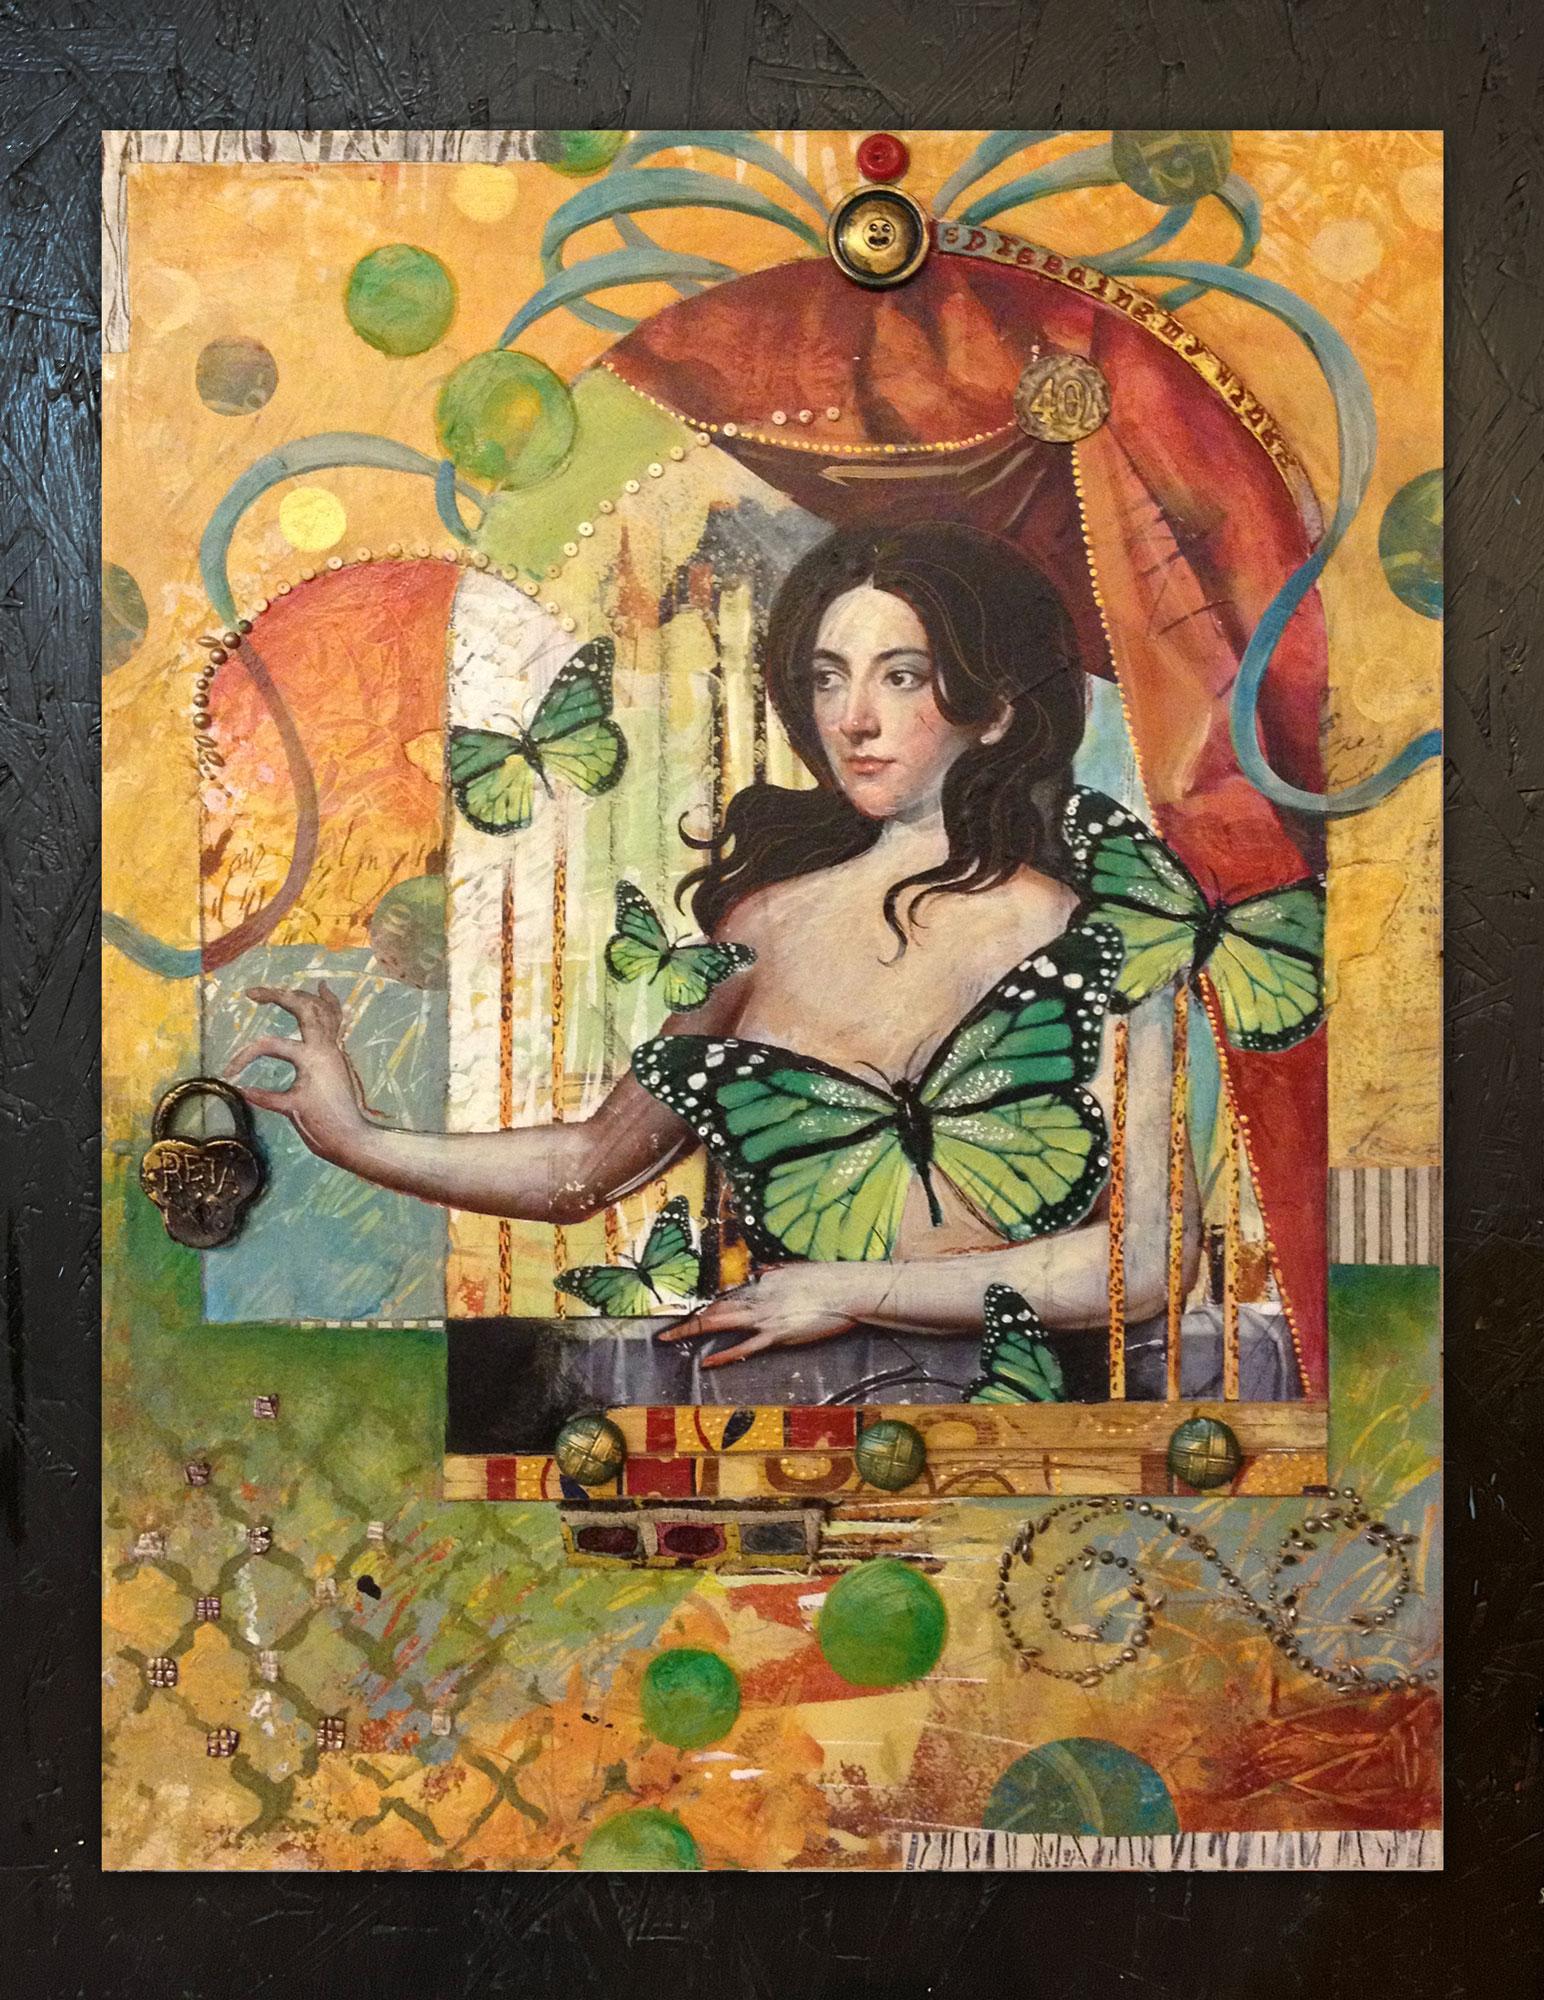 <p>Artist Comments<br>Darlene McElroy creates a nude portrait of a woman with emerald butterflies concealing her body. Framed within an ornate window, she reaches delicately for a golden lock. 